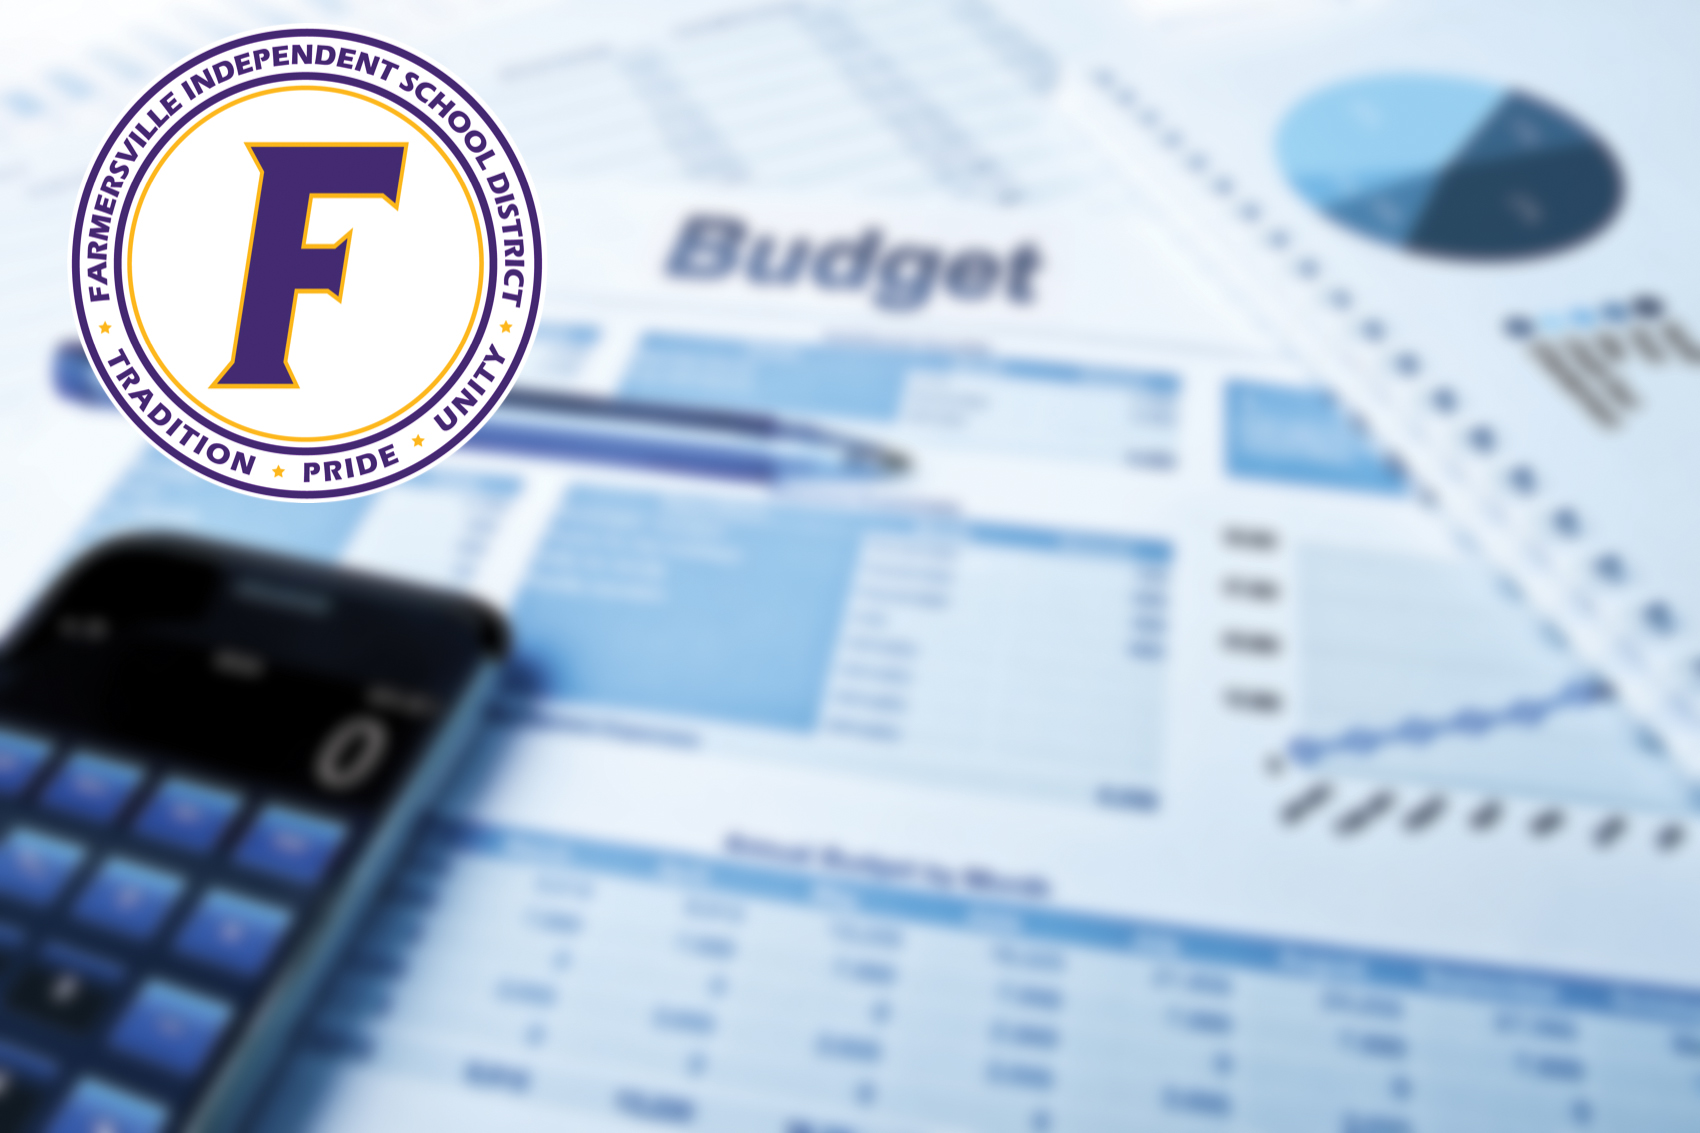 Proposed FISD budget presented